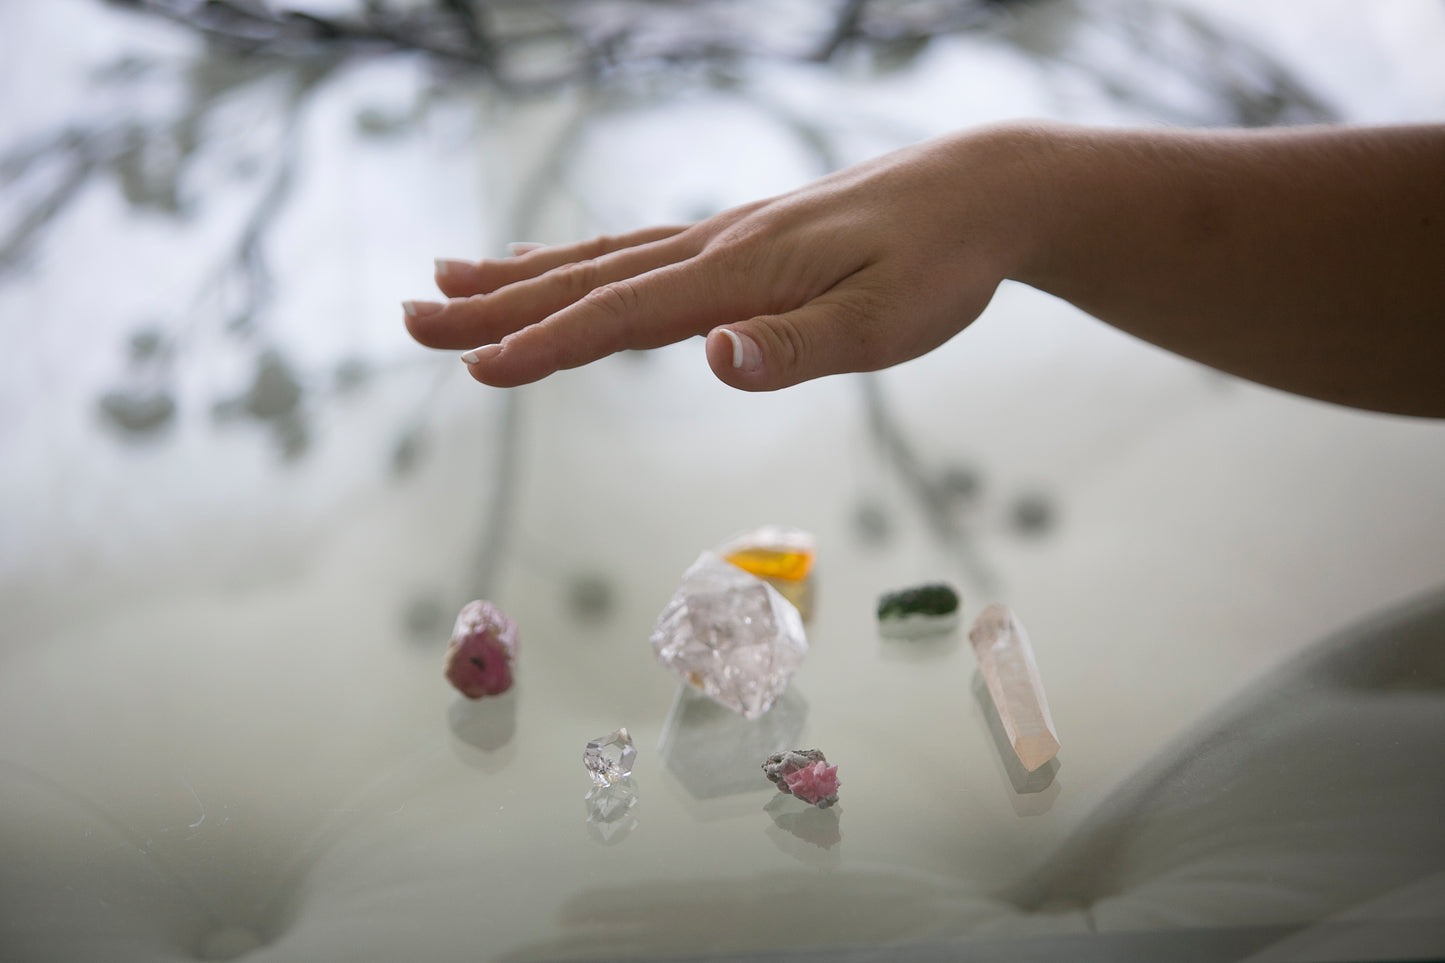 Crystal Workshop: Unlock the Magic of Crystals to Empower Your Life